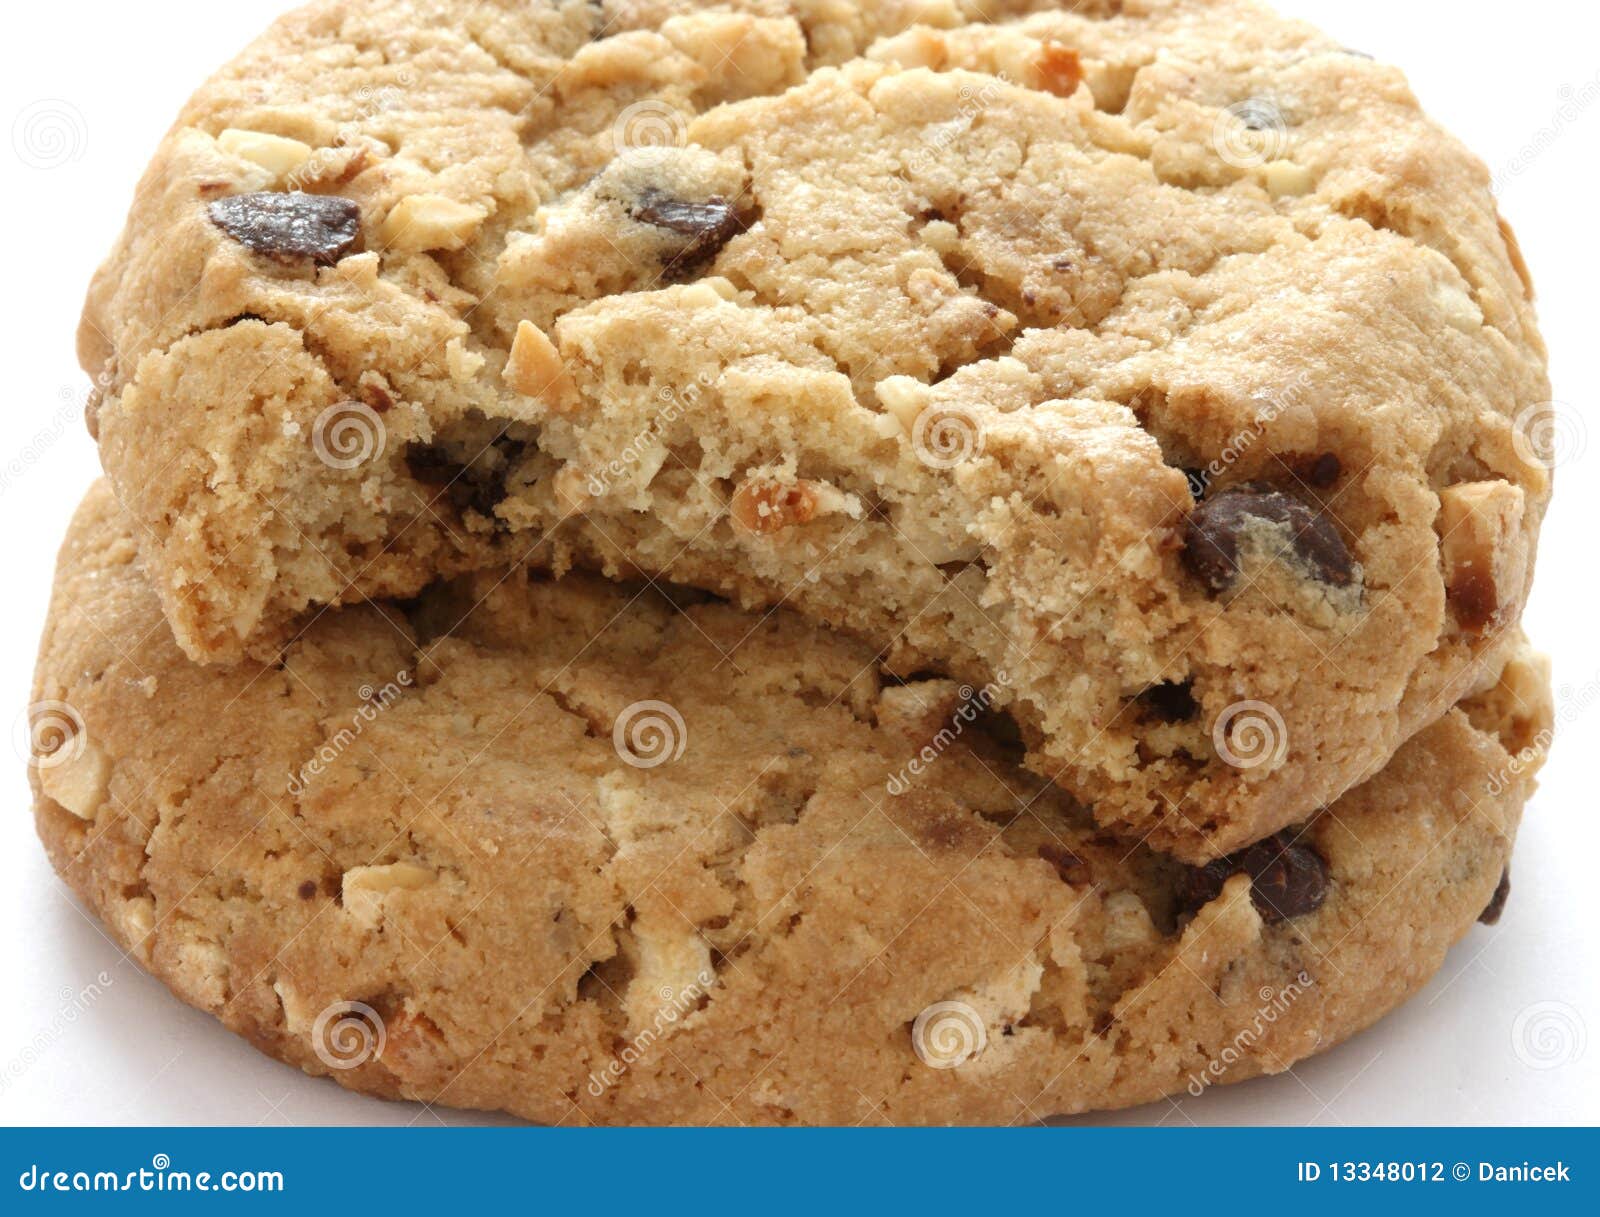 Two chocolate chip cookies stock photo. Image of snack - 13348012